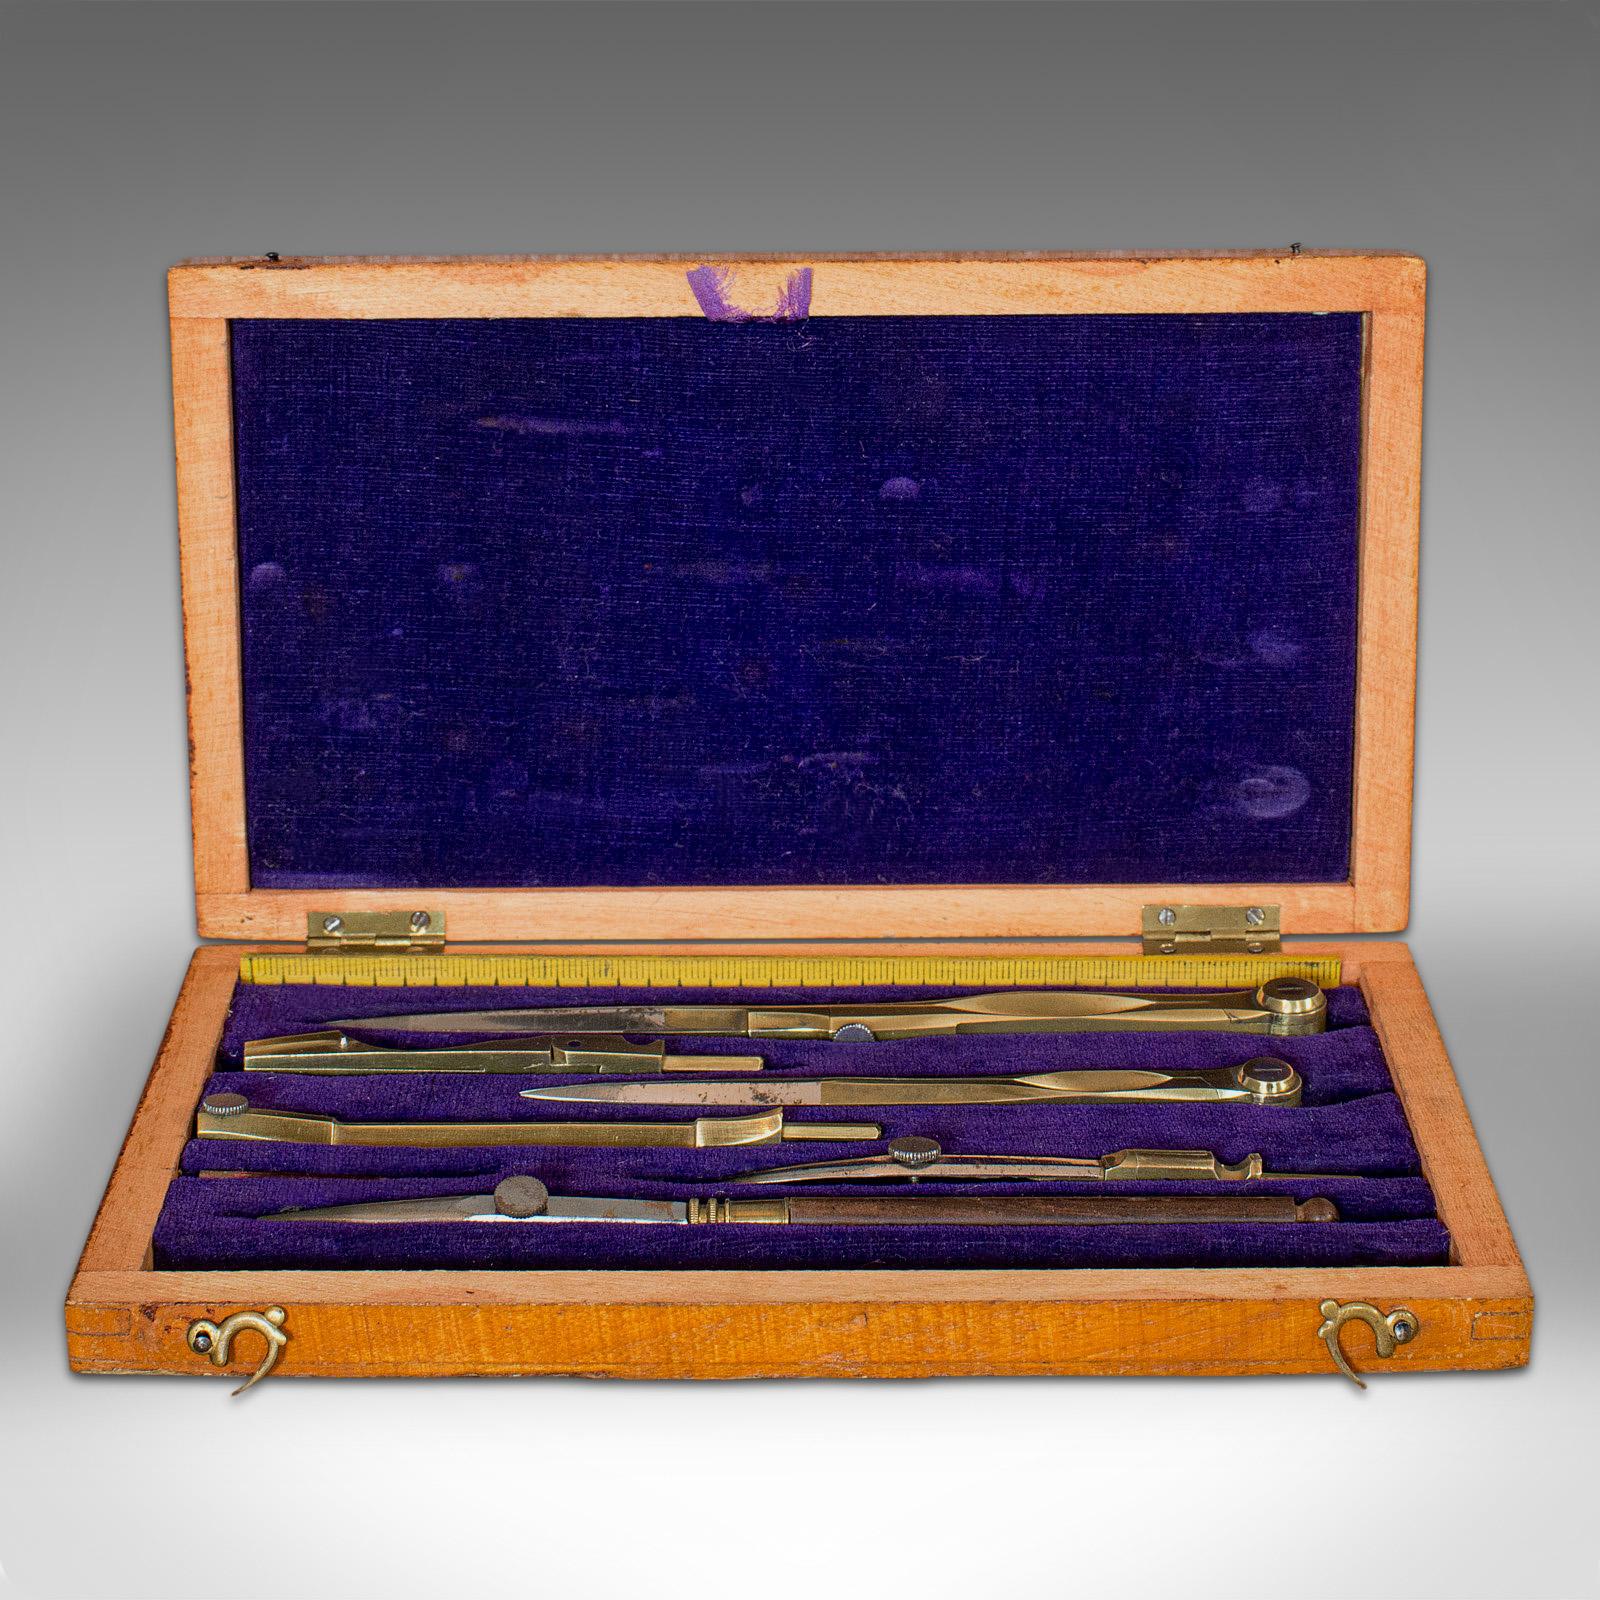 This is a vintage drawing set. An English, boxed draughtsman's or cartographer's instrument compendium, dating to the mid-20th century, circa 1950.

Vintage precision tools
Displays a desirable aged patina
Wooden carry case shows fine grain